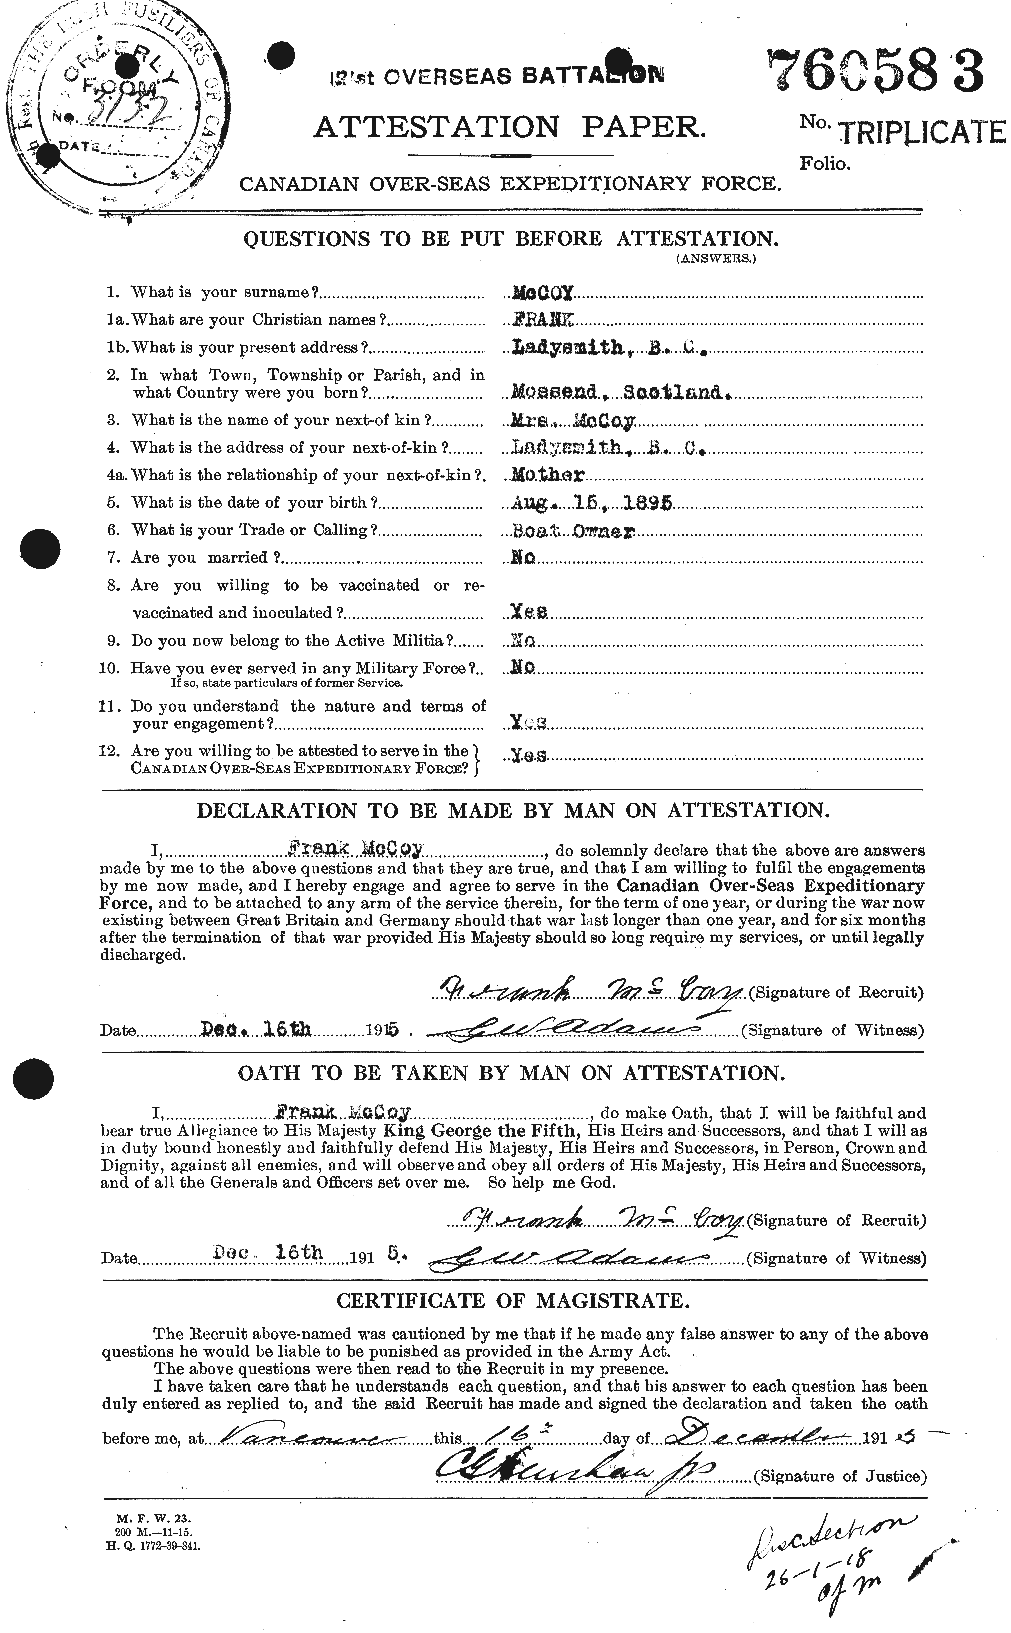 Personnel Records of the First World War - CEF 134861a